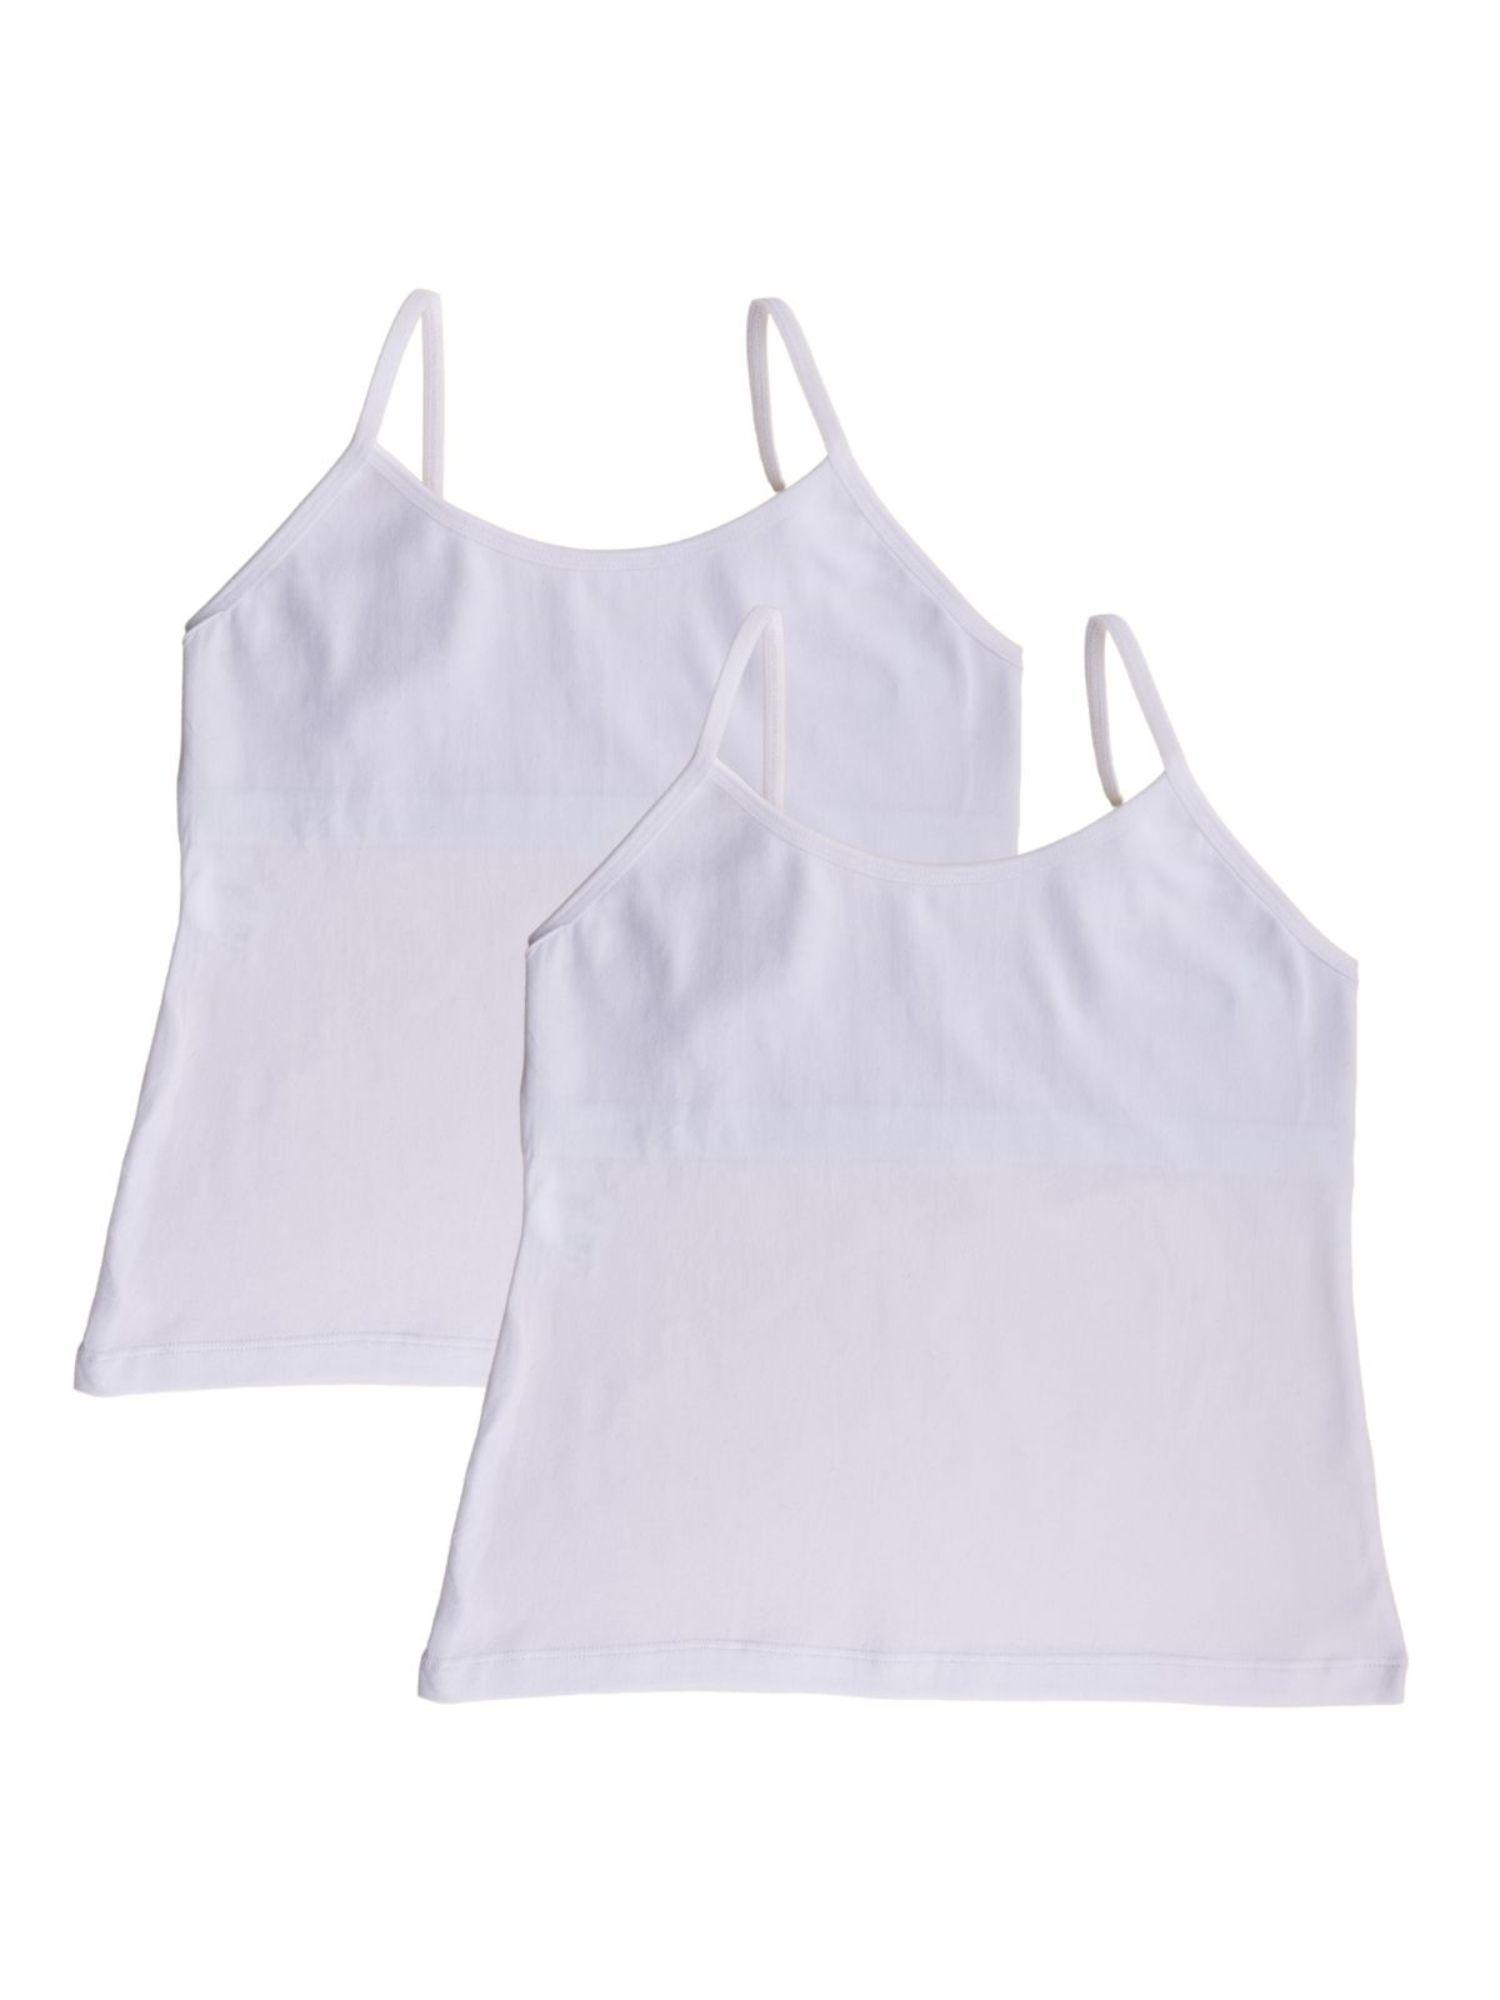 pack of 2 starter camisole - padded - white